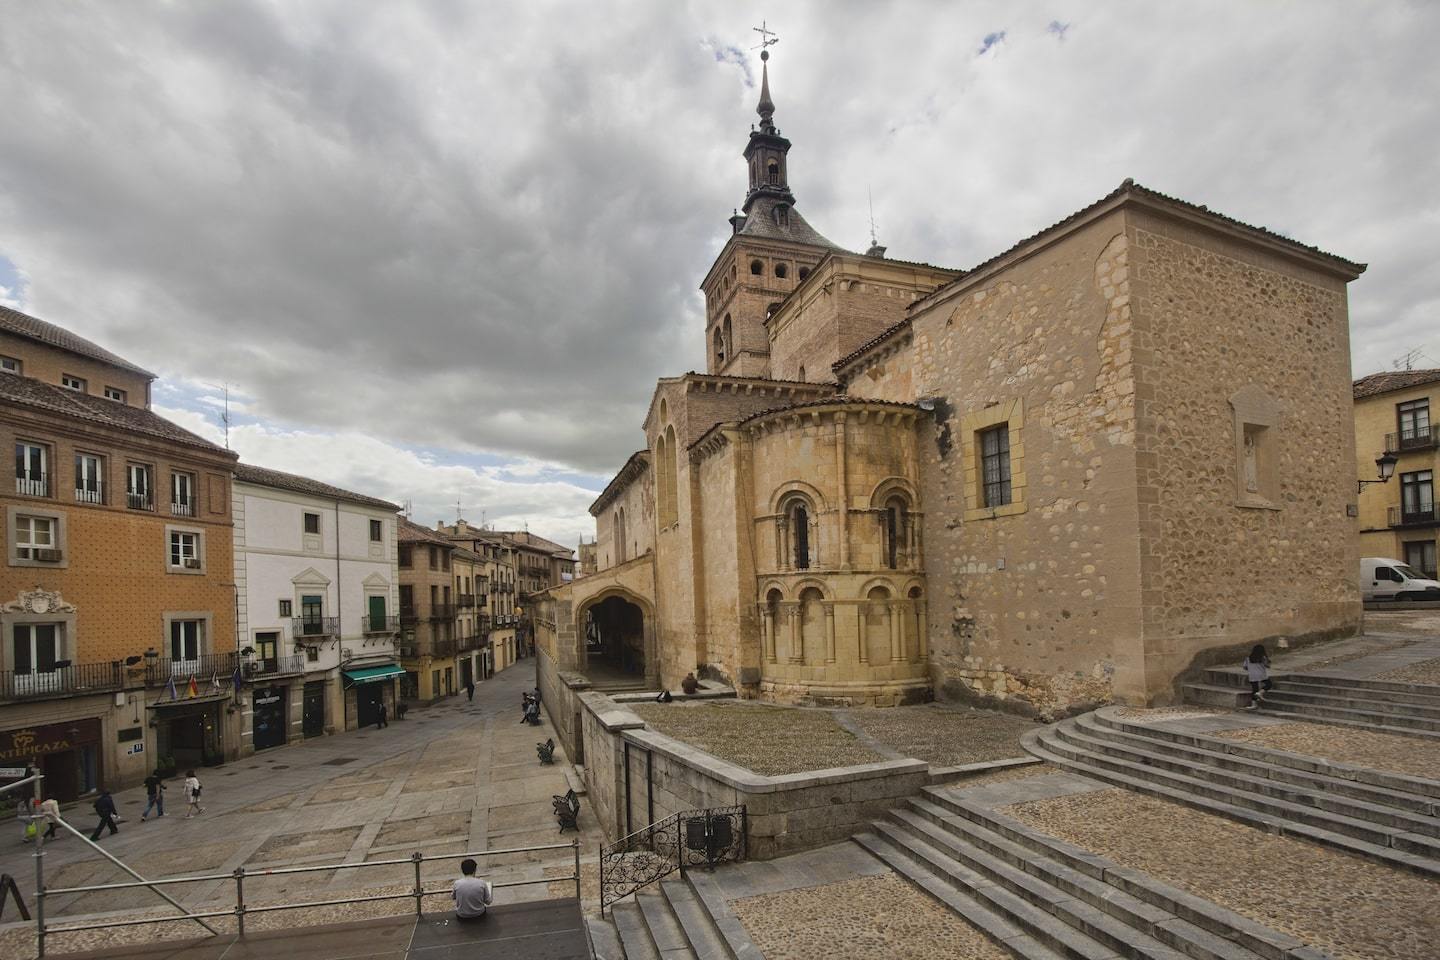 large church, steps and town square on cloudy day